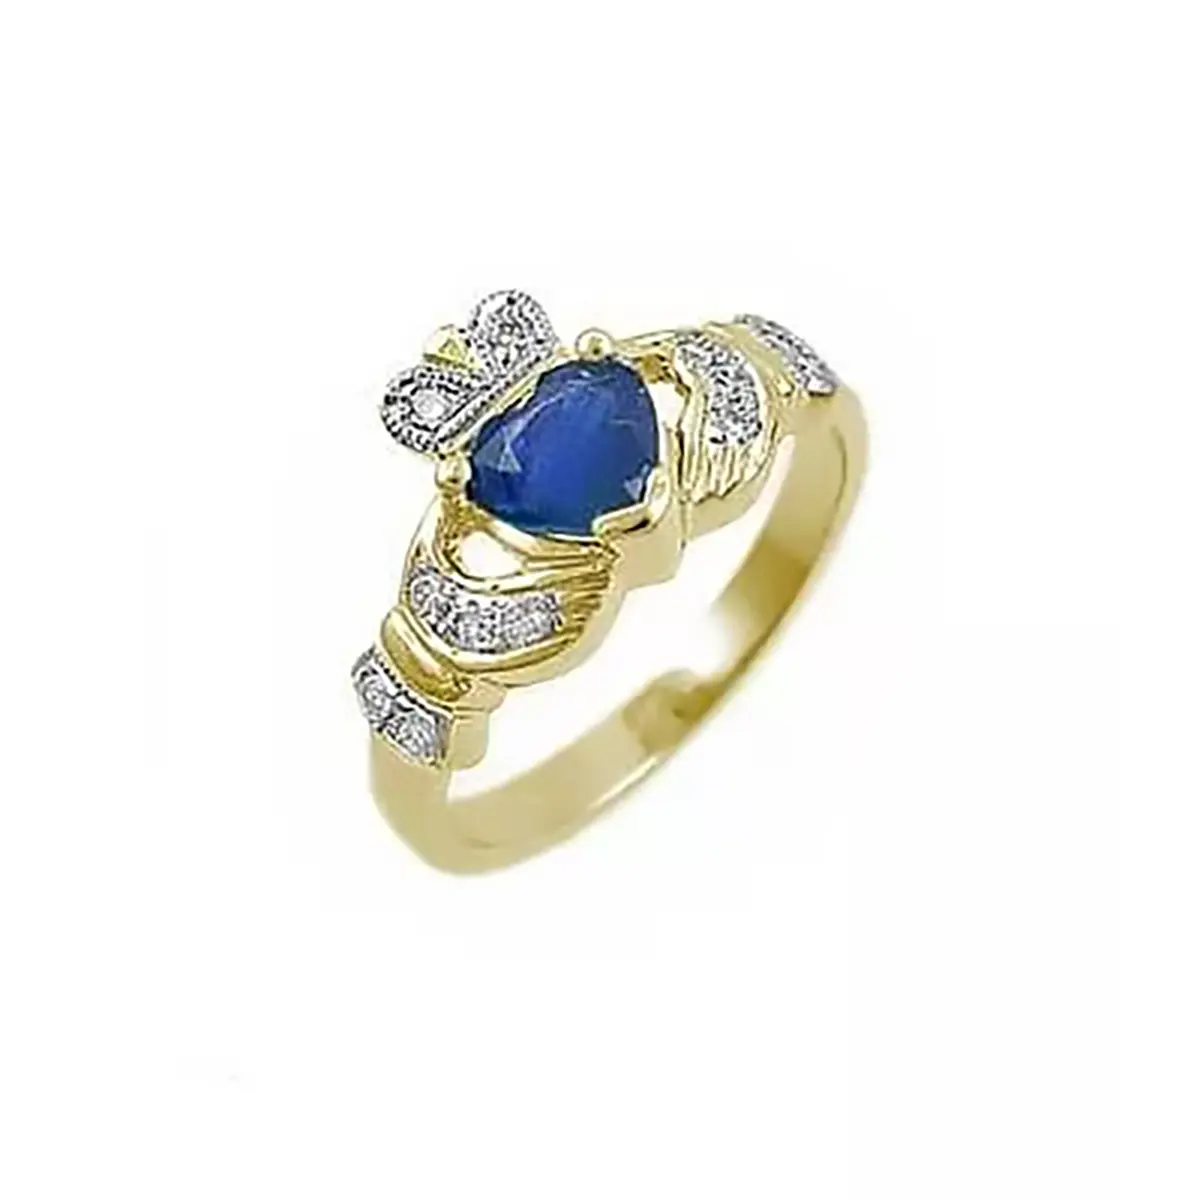 Claddagh Ring With Heartshape Sapphire And Diamond Set